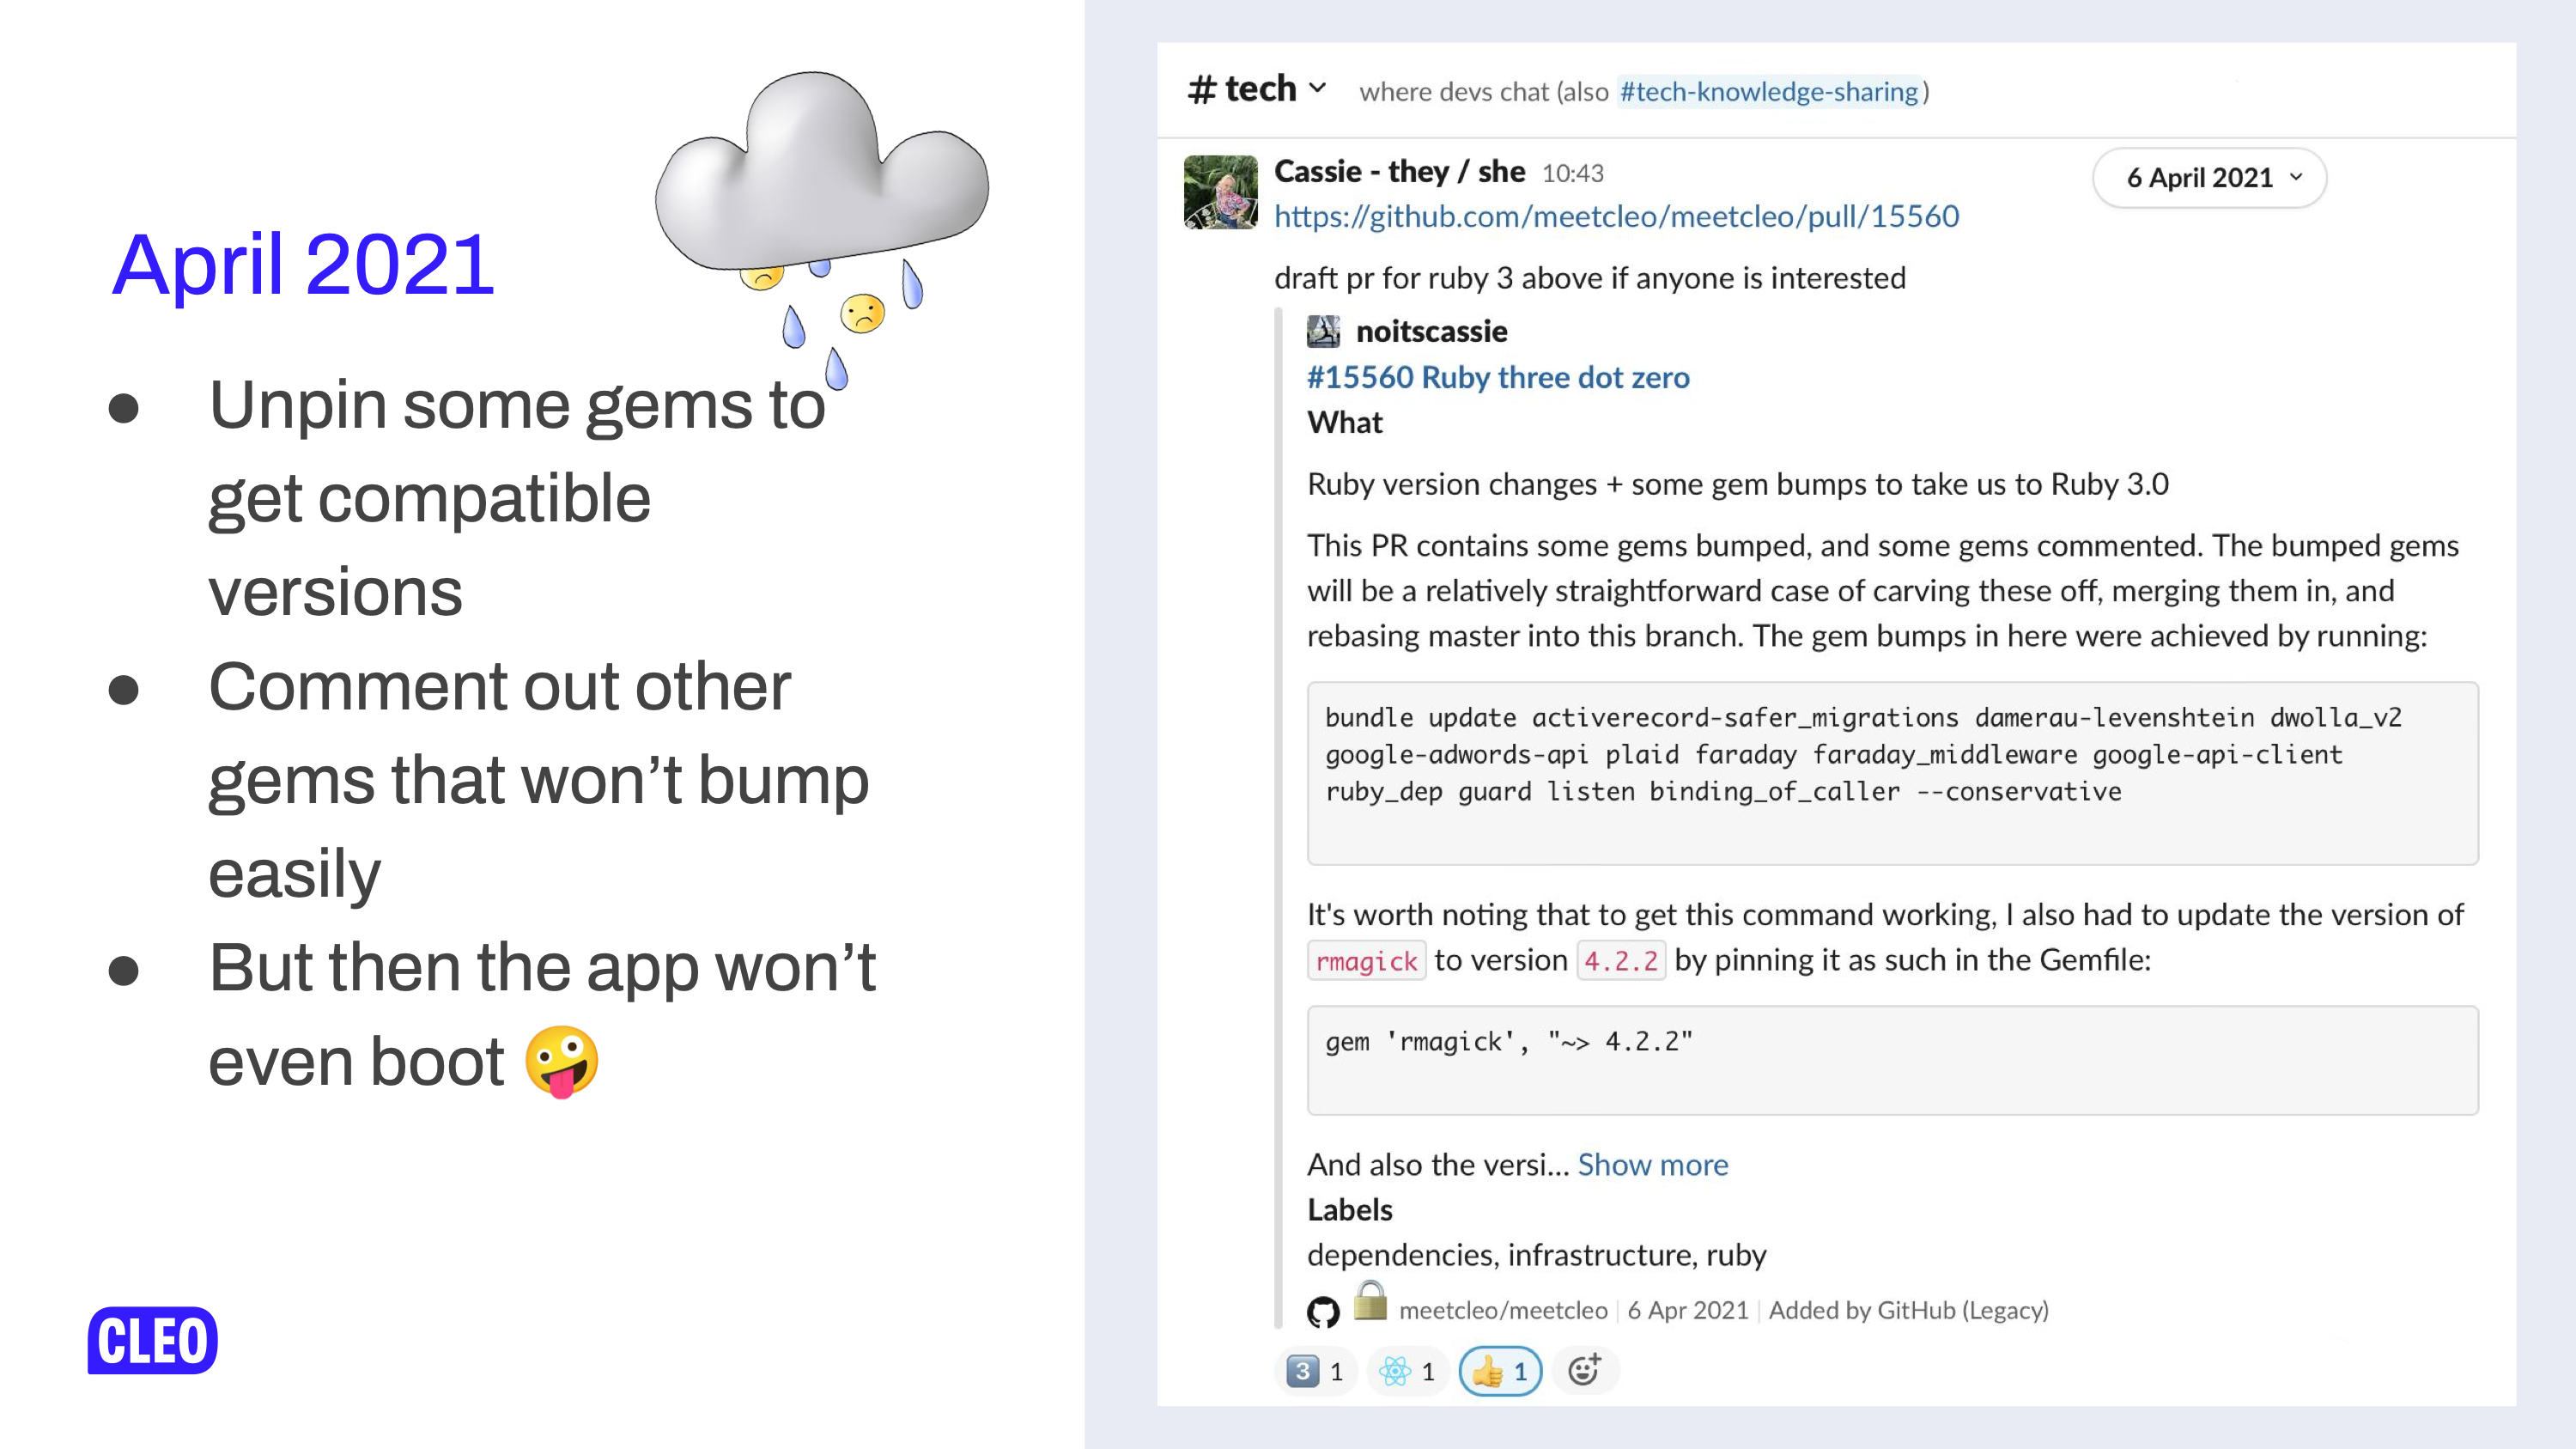 An image of the initial draft PR from April 2021, with some text explaining what happened.  There is a sad rain cloud graphic to give a hint as to how it went. text: April 2021, Unpin some Gems to get compatible versions, Comment out other gems that won't bump easily, But then the app won't even boot